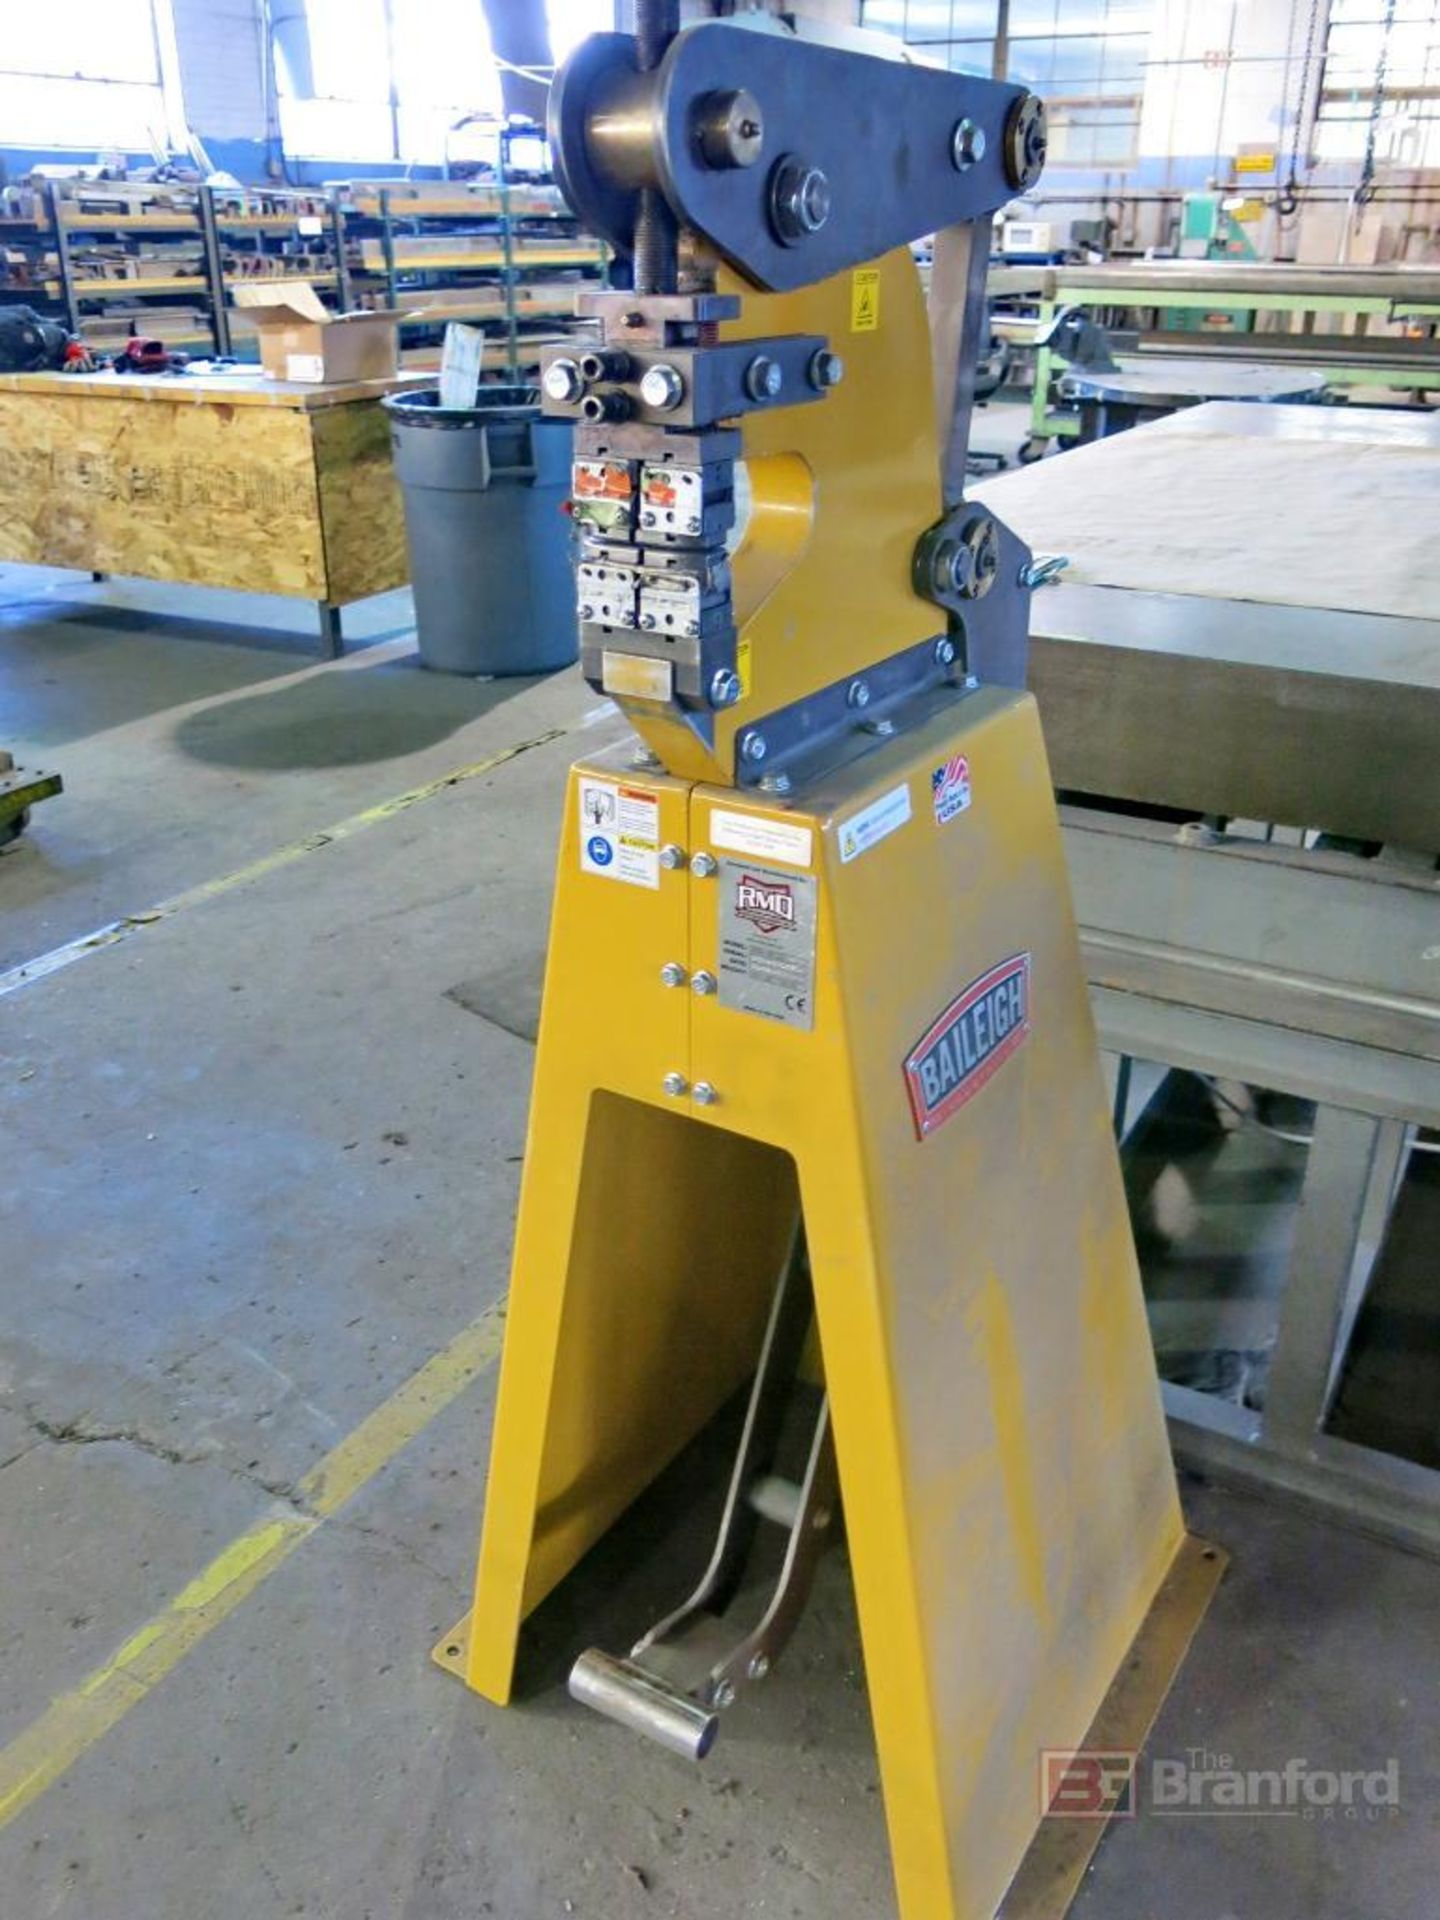 Baileigh MSS-14F-CE Foot Operated Punch (2019) - Image 2 of 3